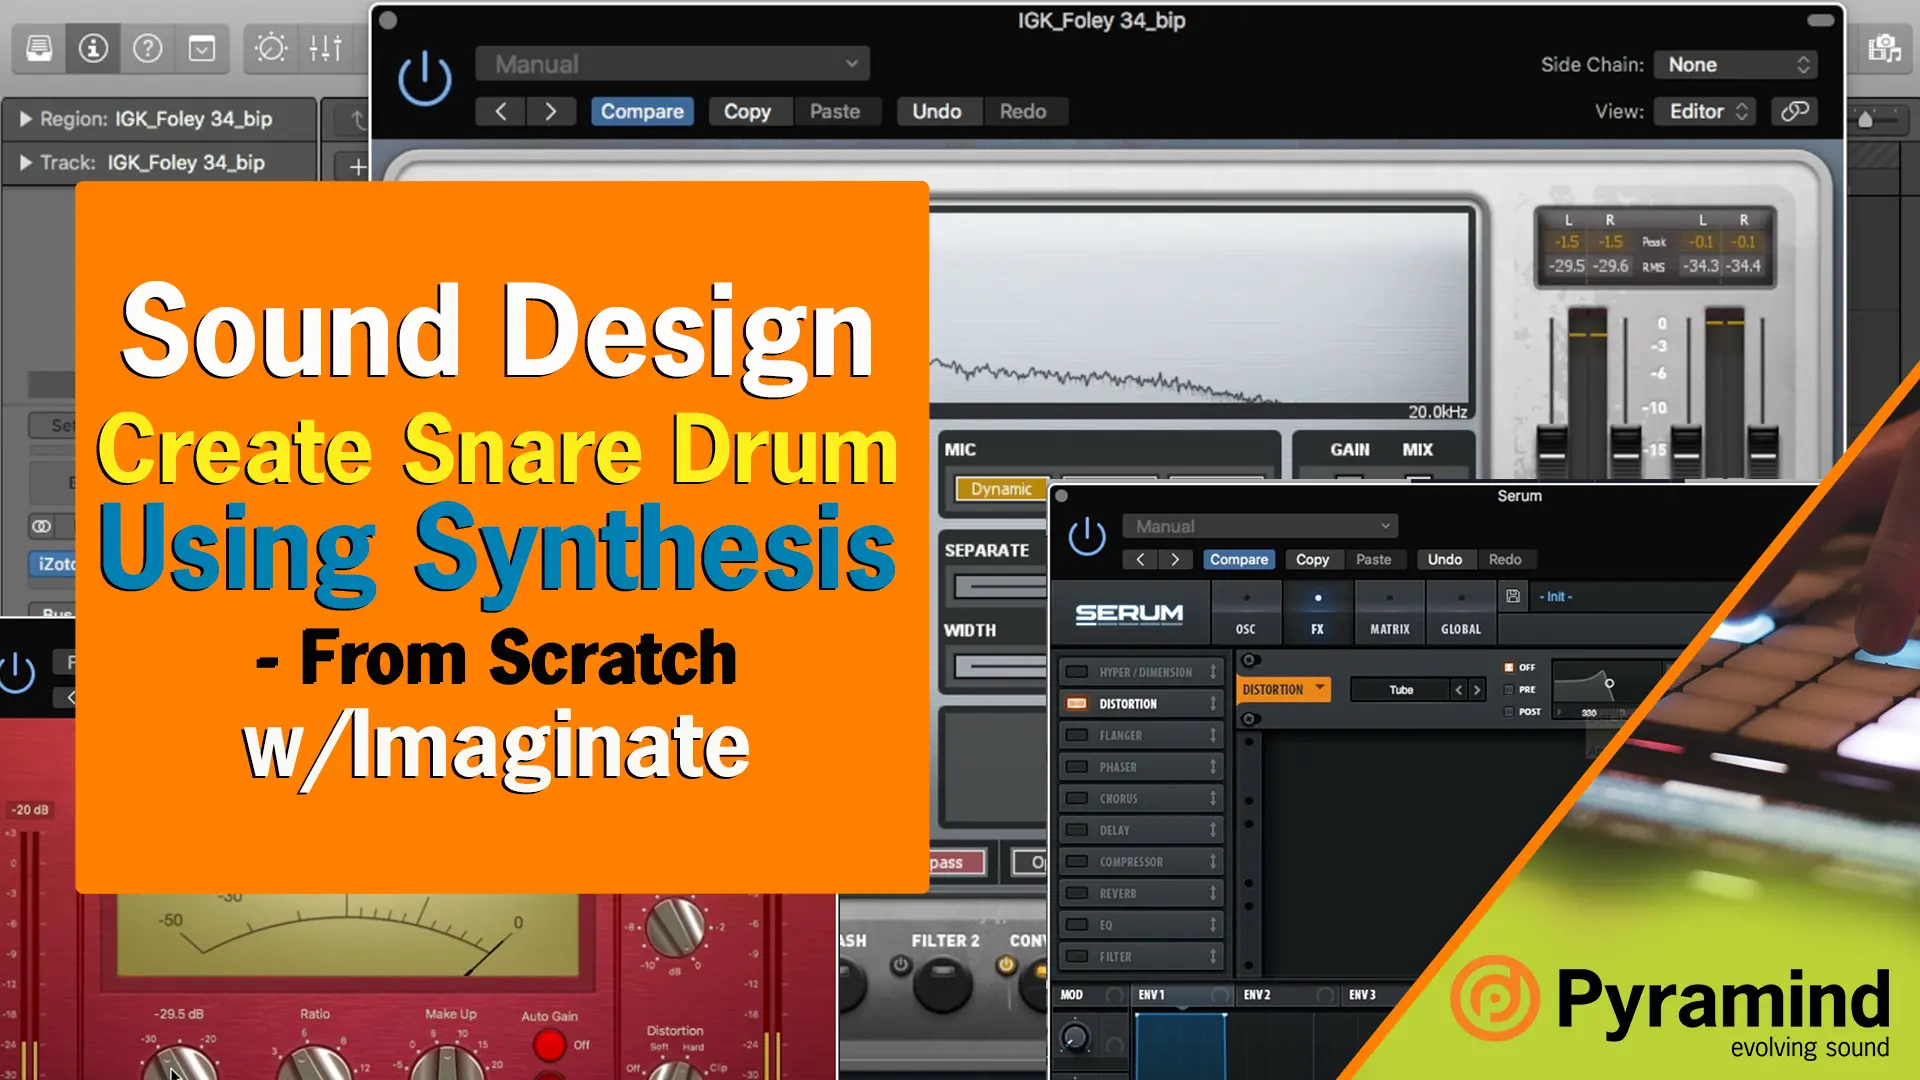 Sound design and beatmaking using synthesizers to create, mix, master, and share drum sounds.